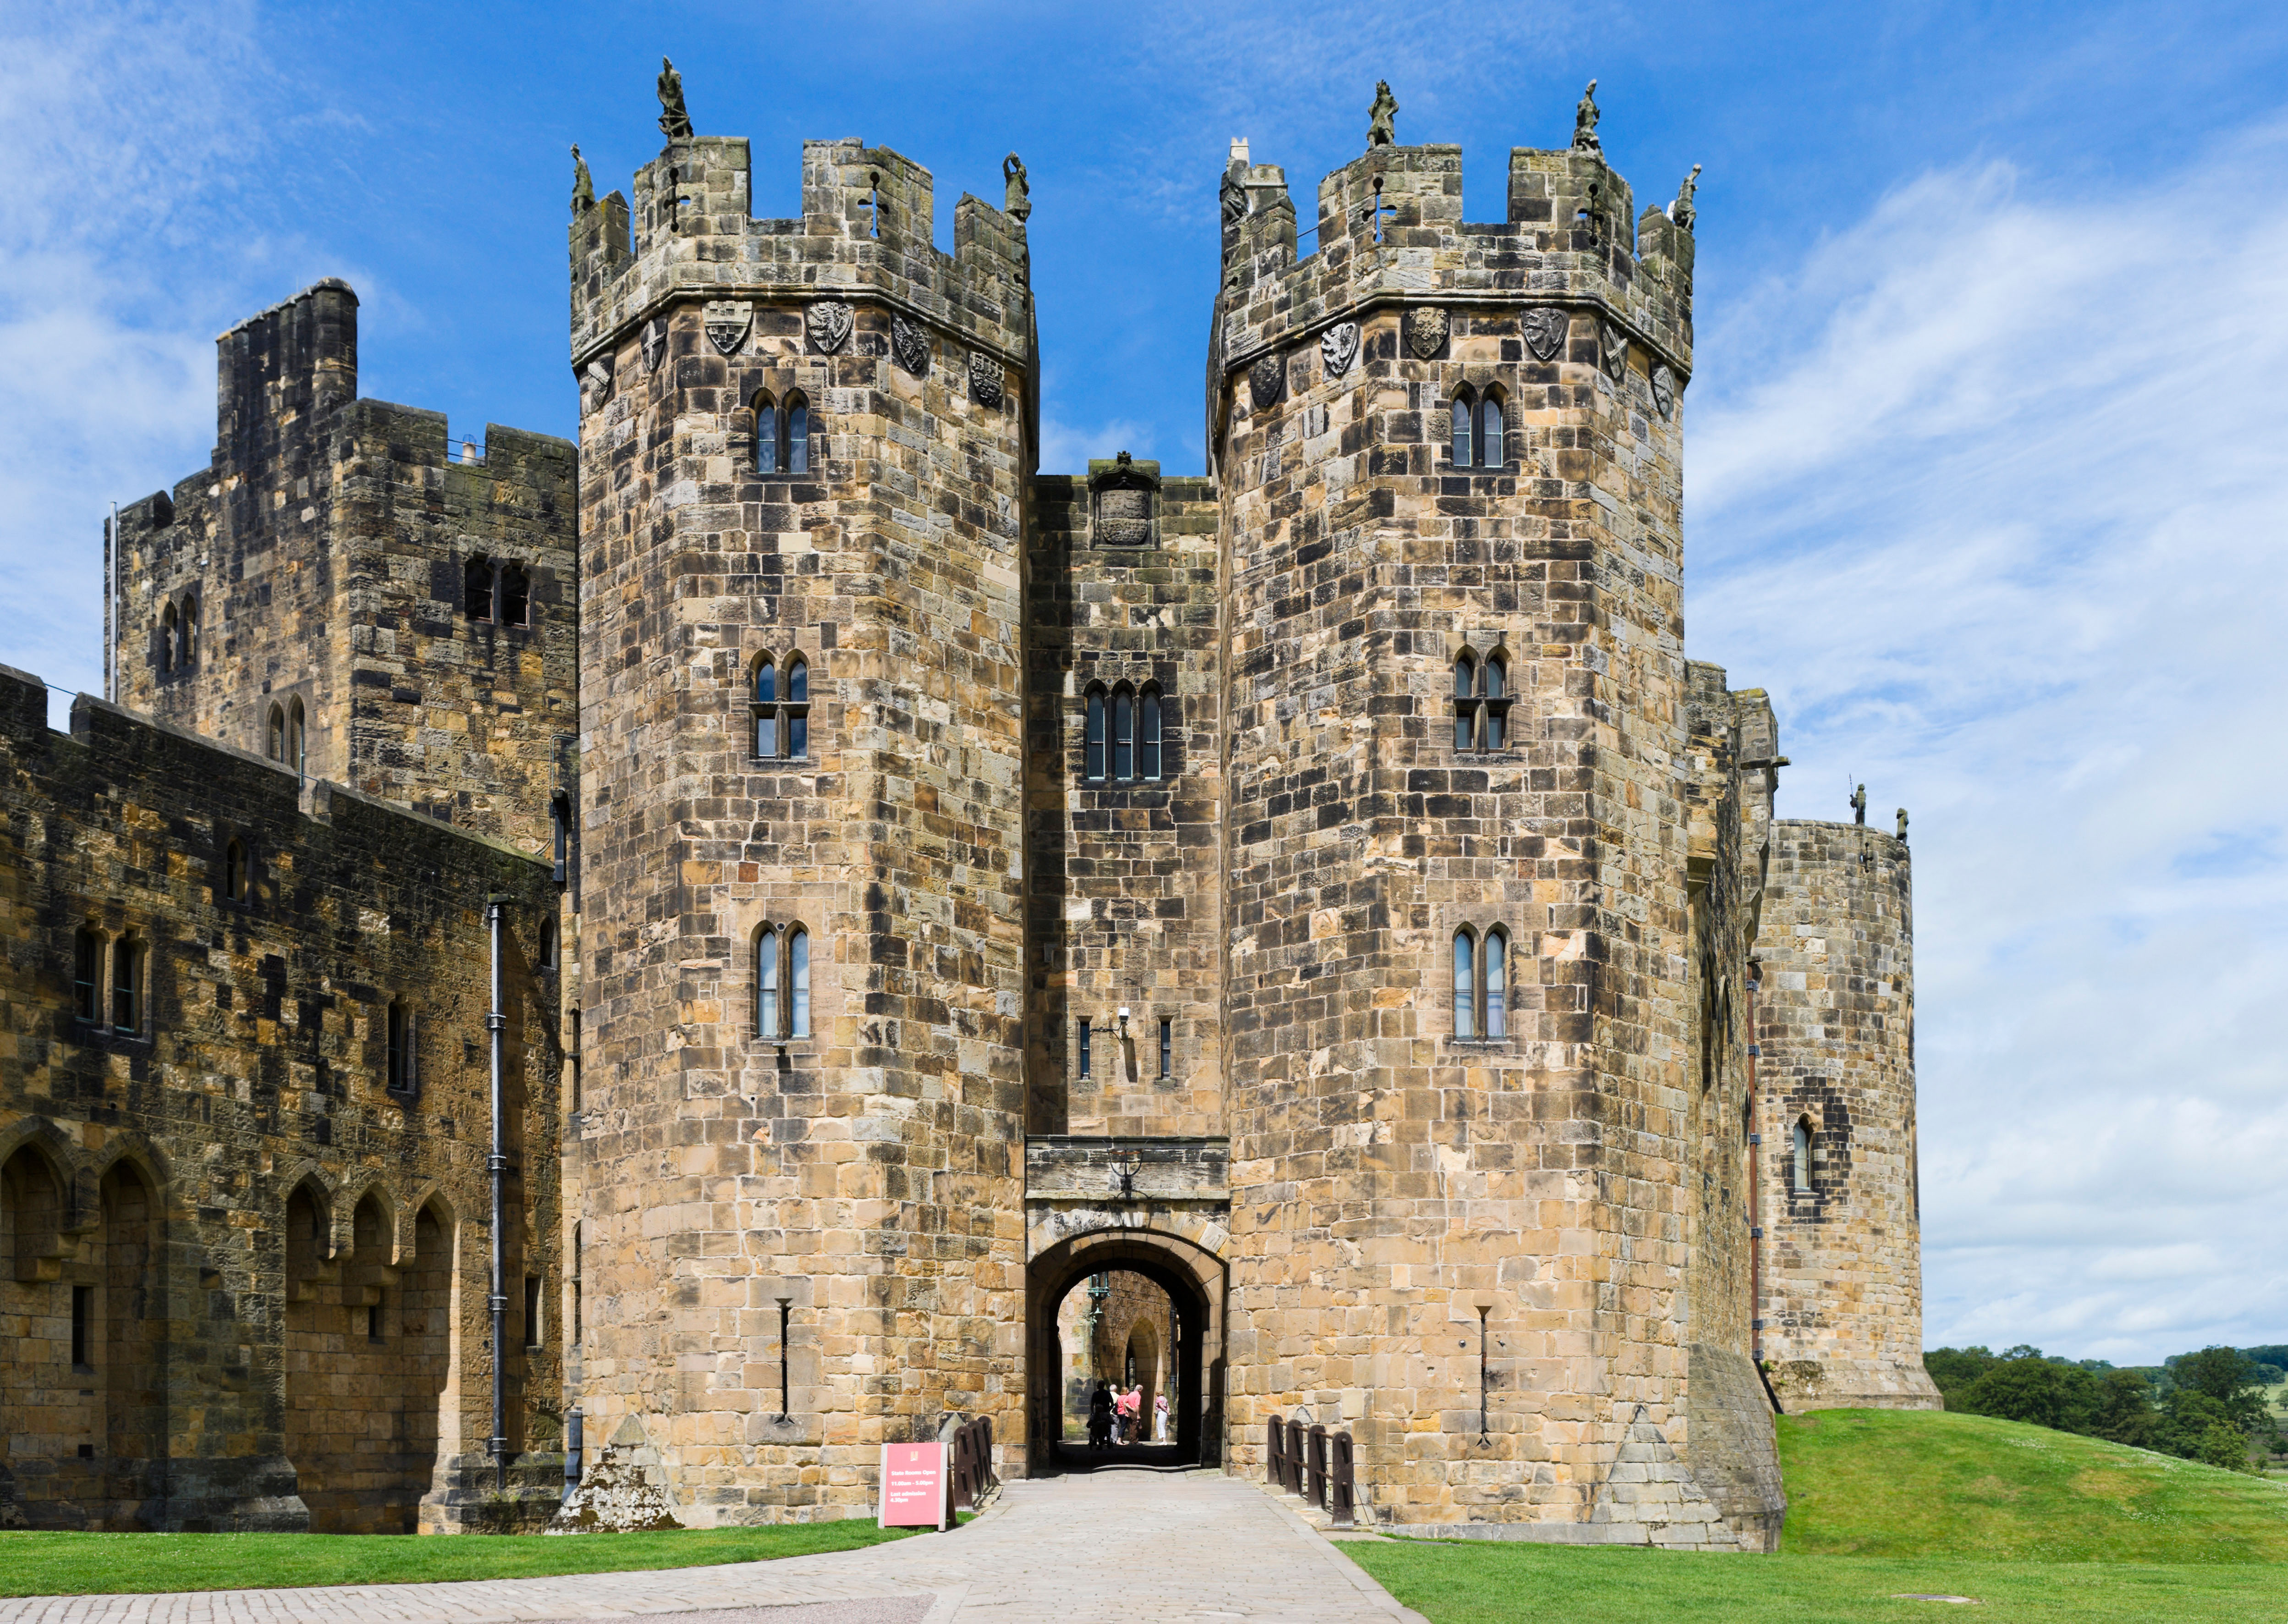 Alnwick Castle is recognisable from Harry Potter and Downton Abbey